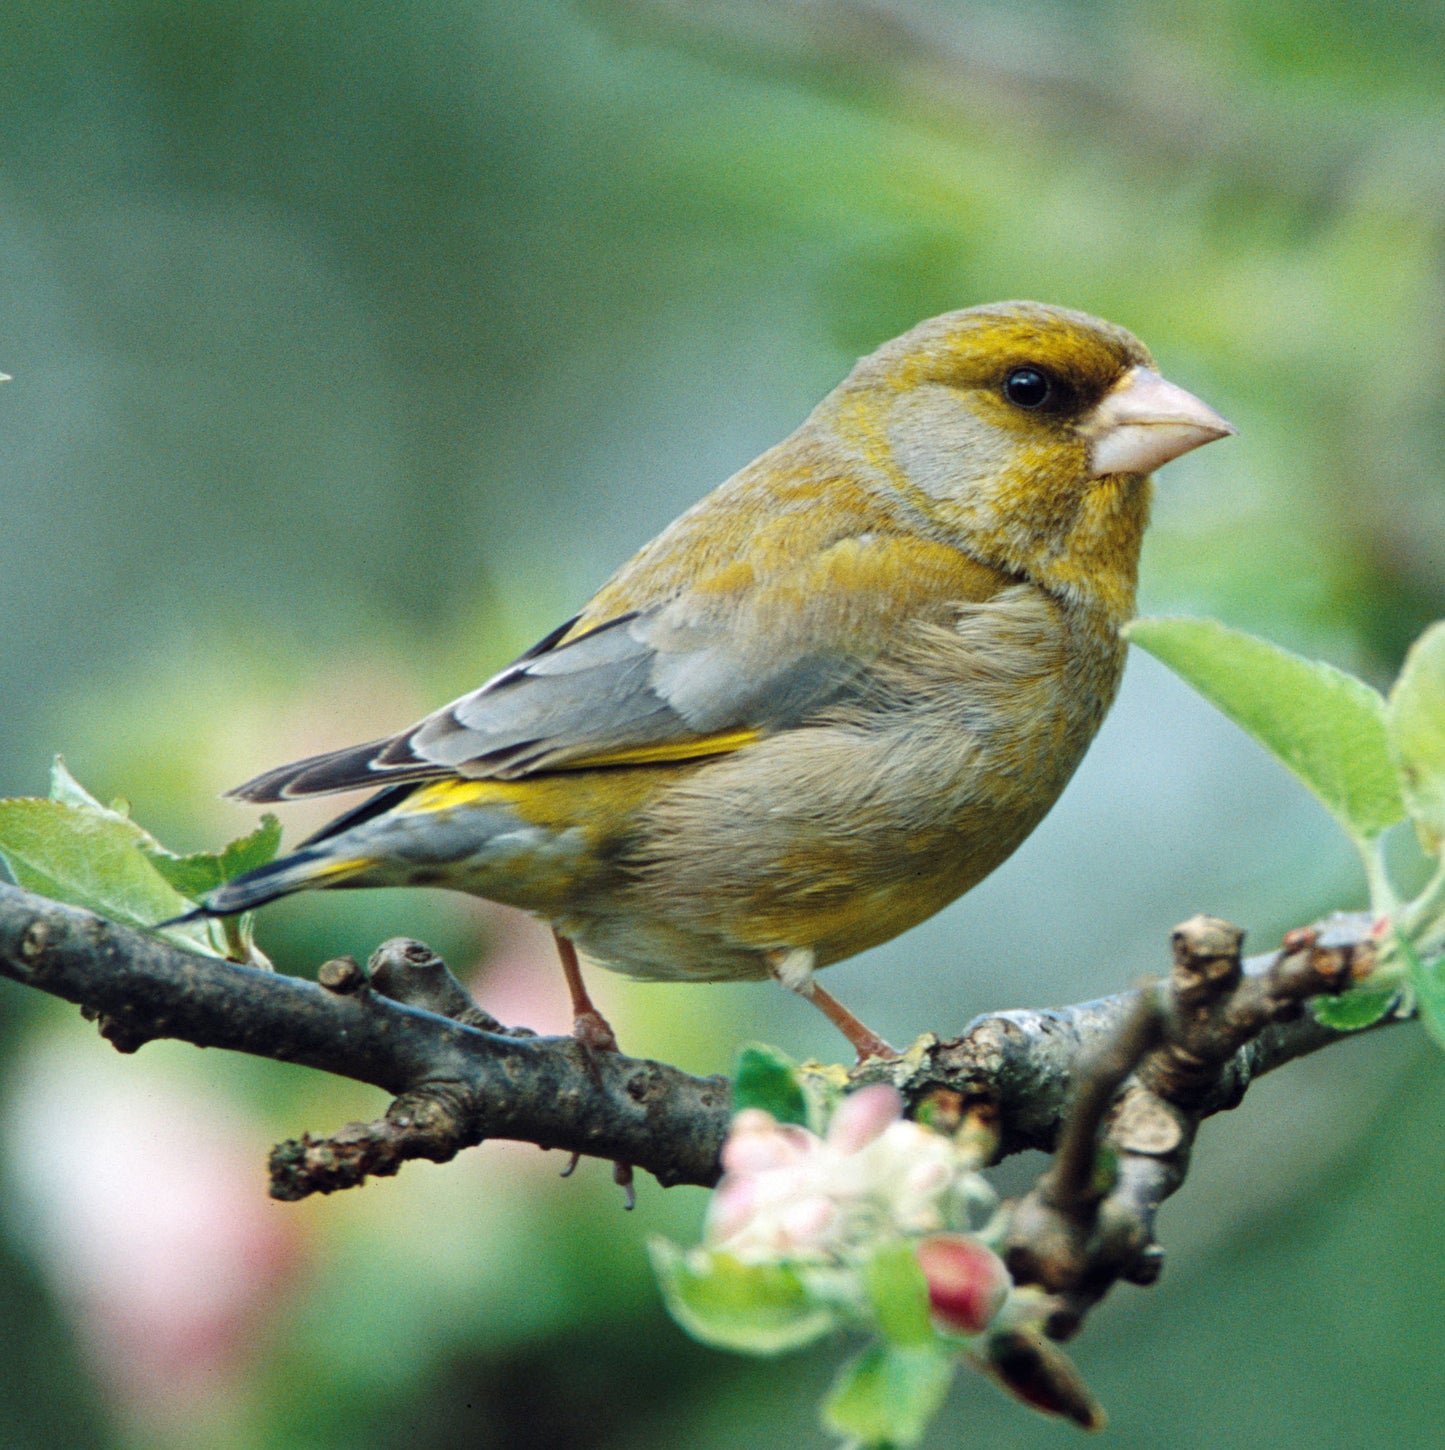 Twittering Greenfinch Sound Greeting Card